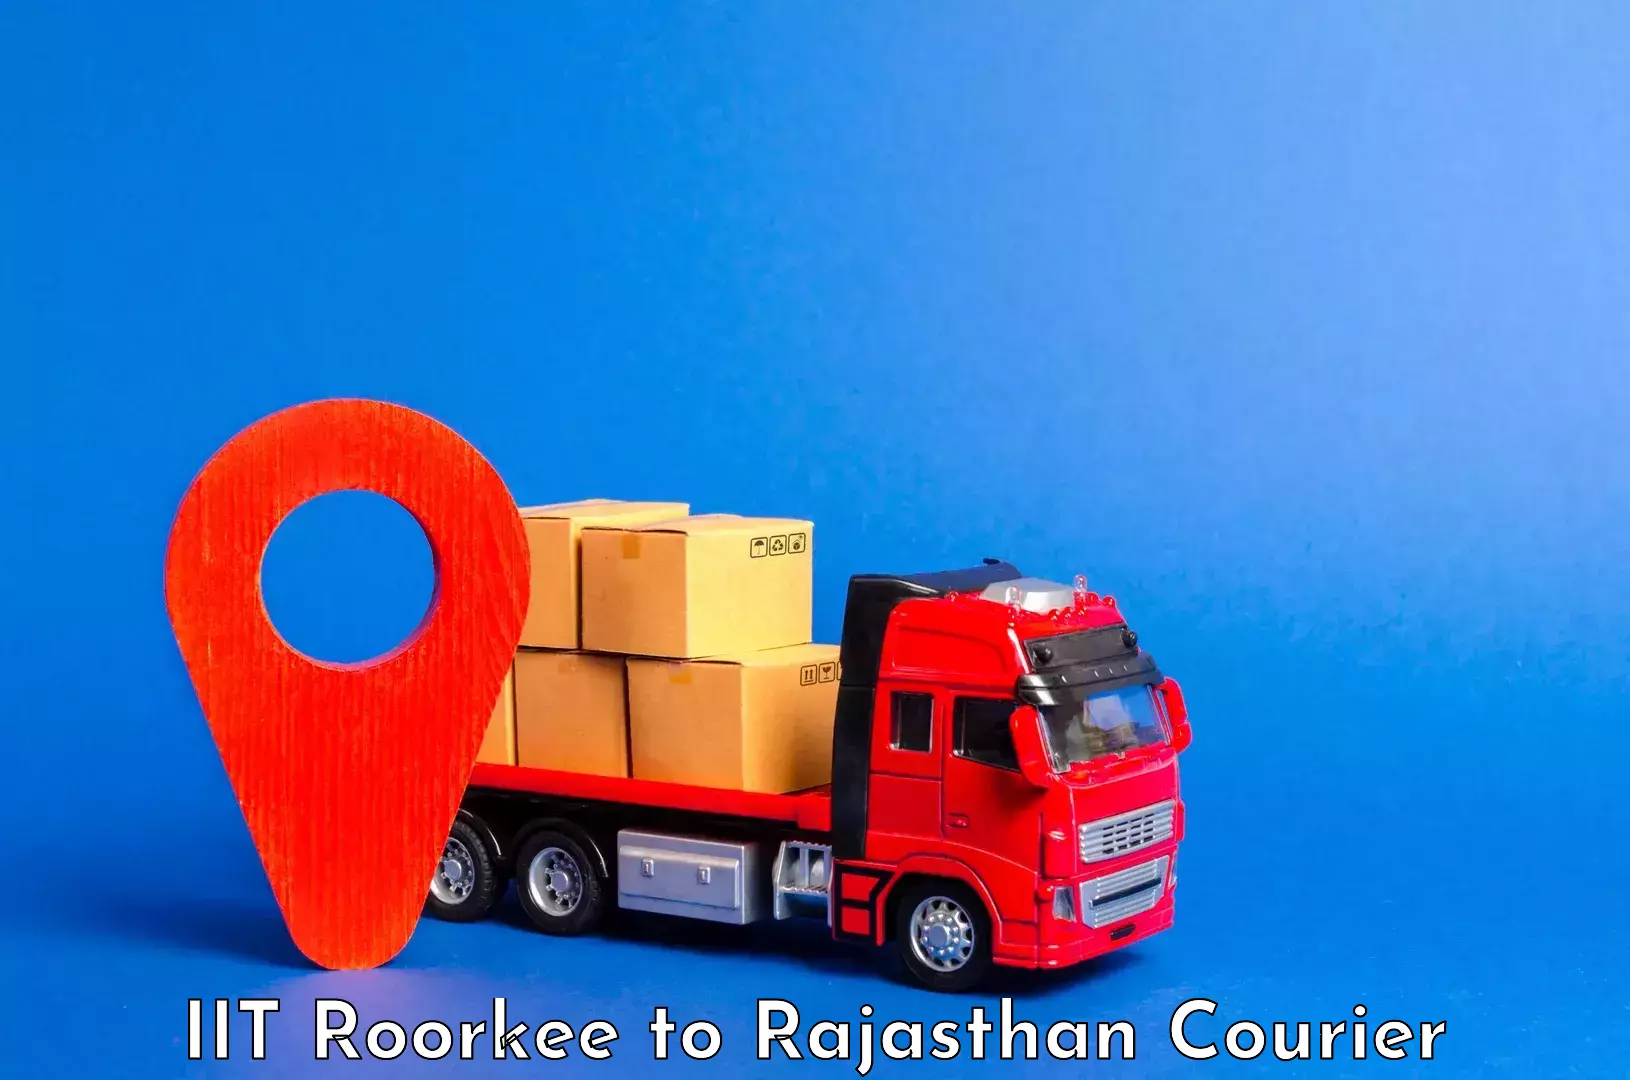 Luggage delivery news IIT Roorkee to Rajasthan